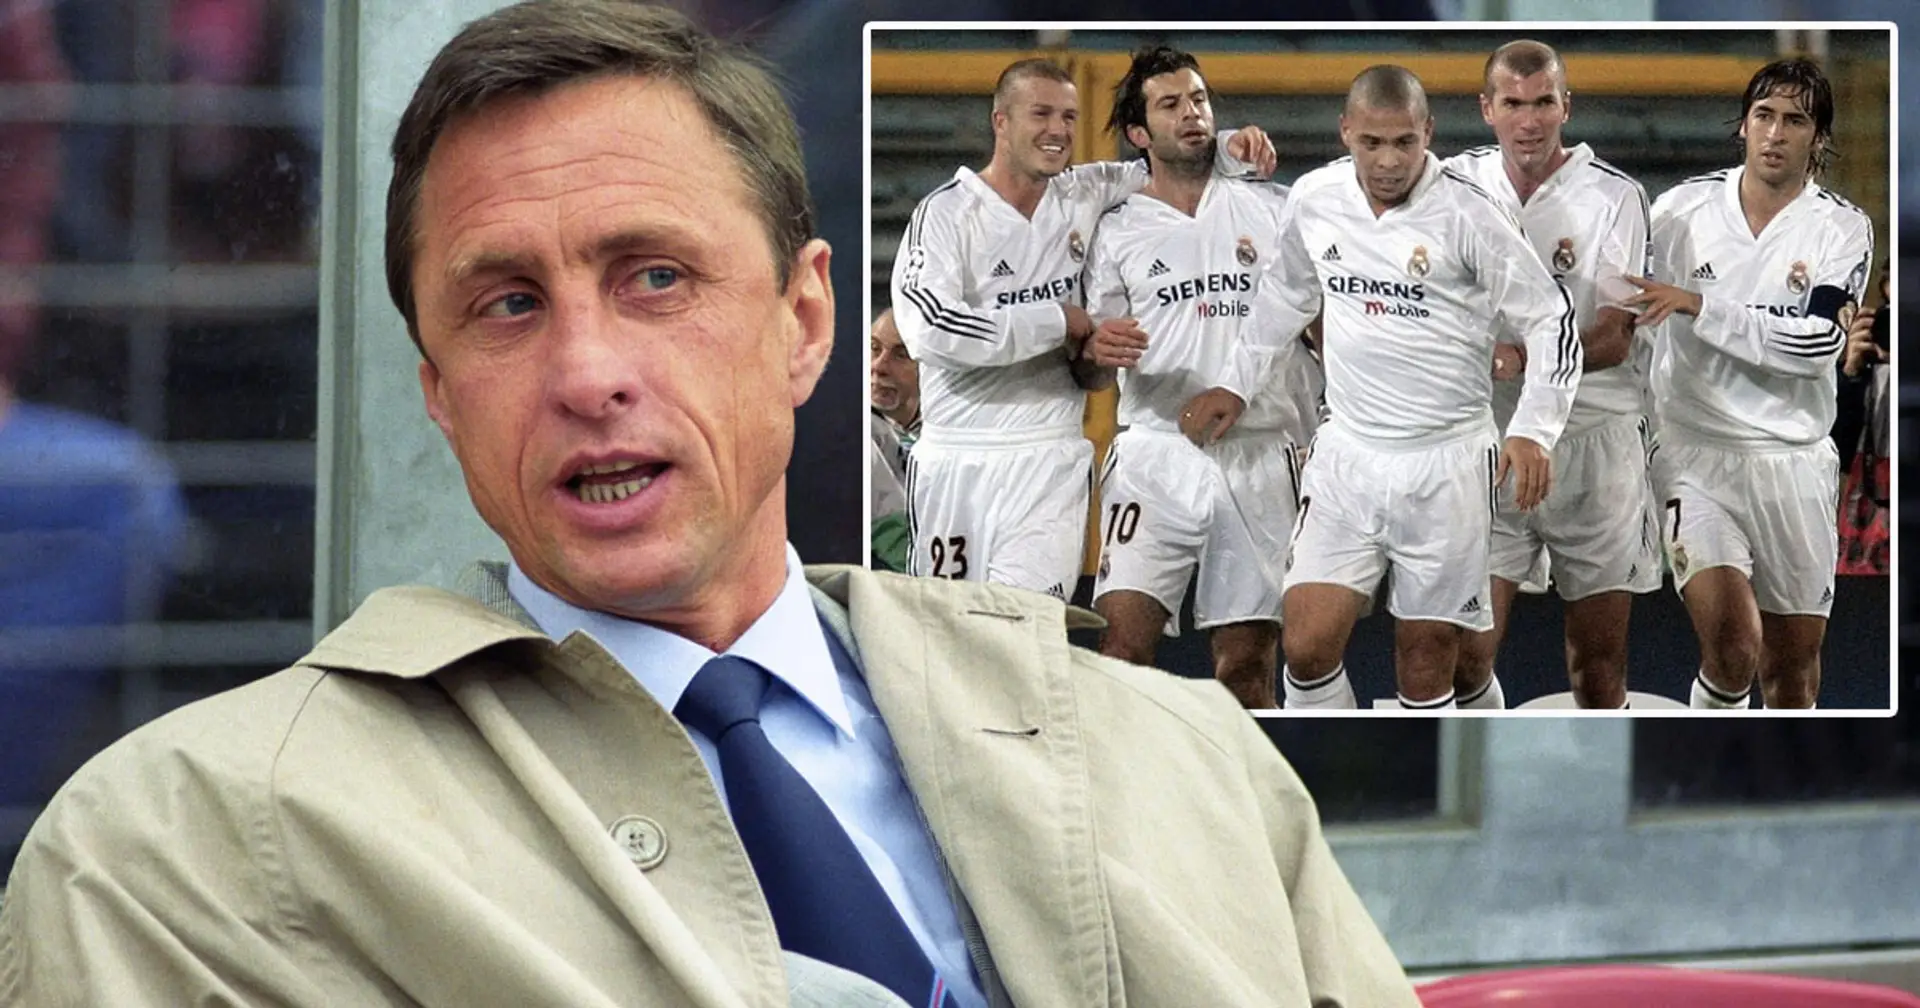 'He's going to Italy?': How Barca board drove Cruyff mad over failed signing - he ended up as Galactico